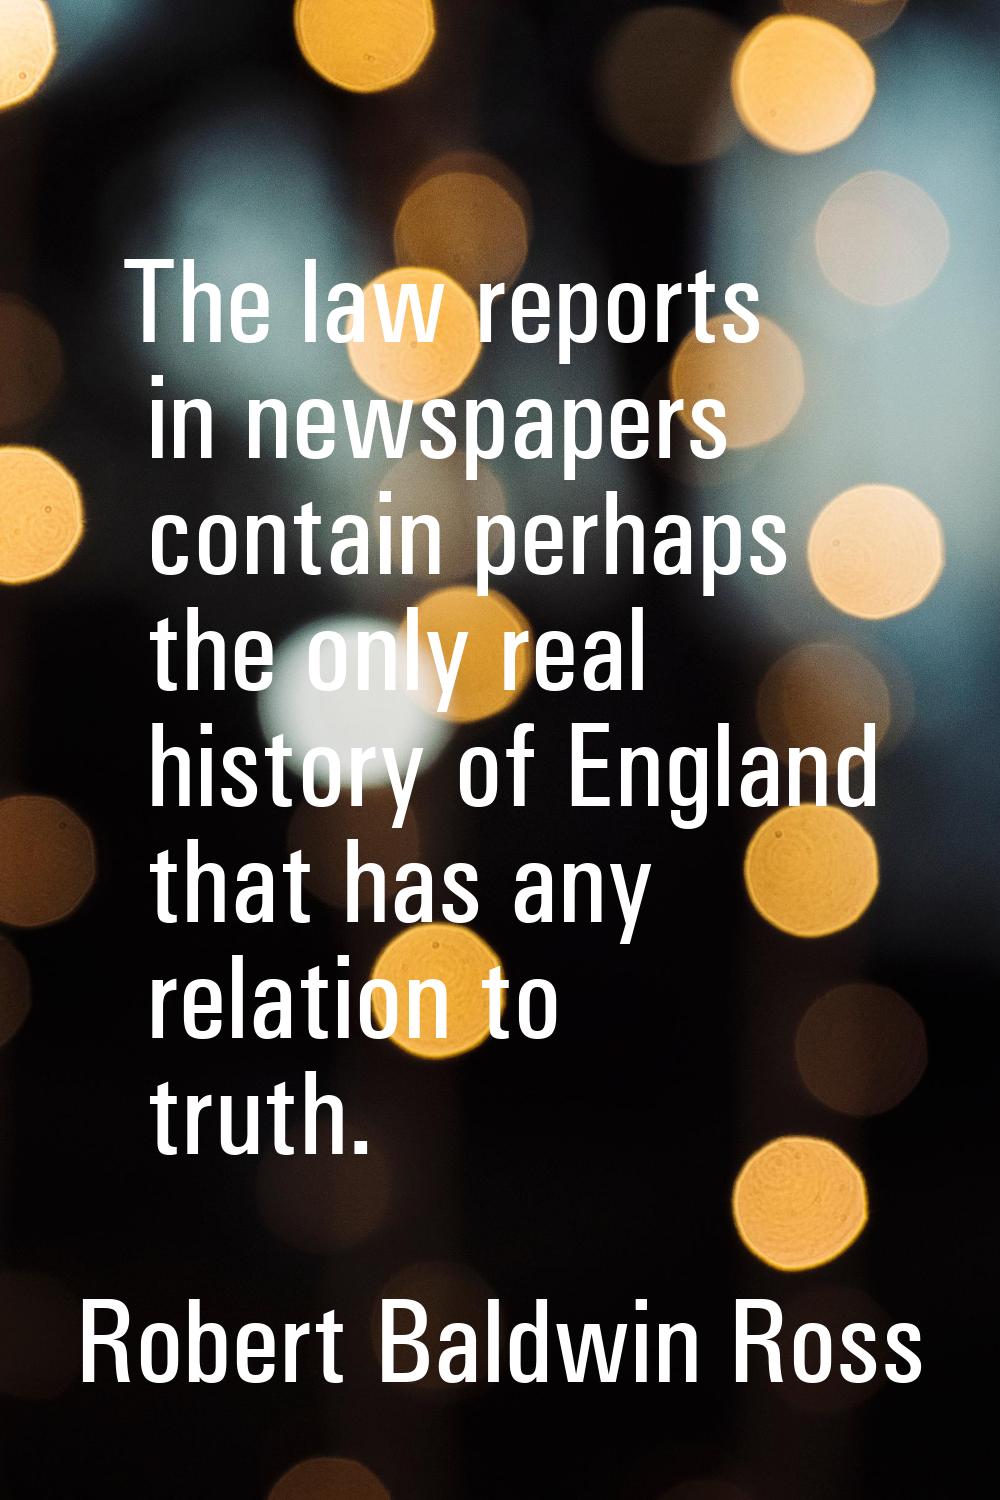 The law reports in newspapers contain perhaps the only real history of England that has any relatio